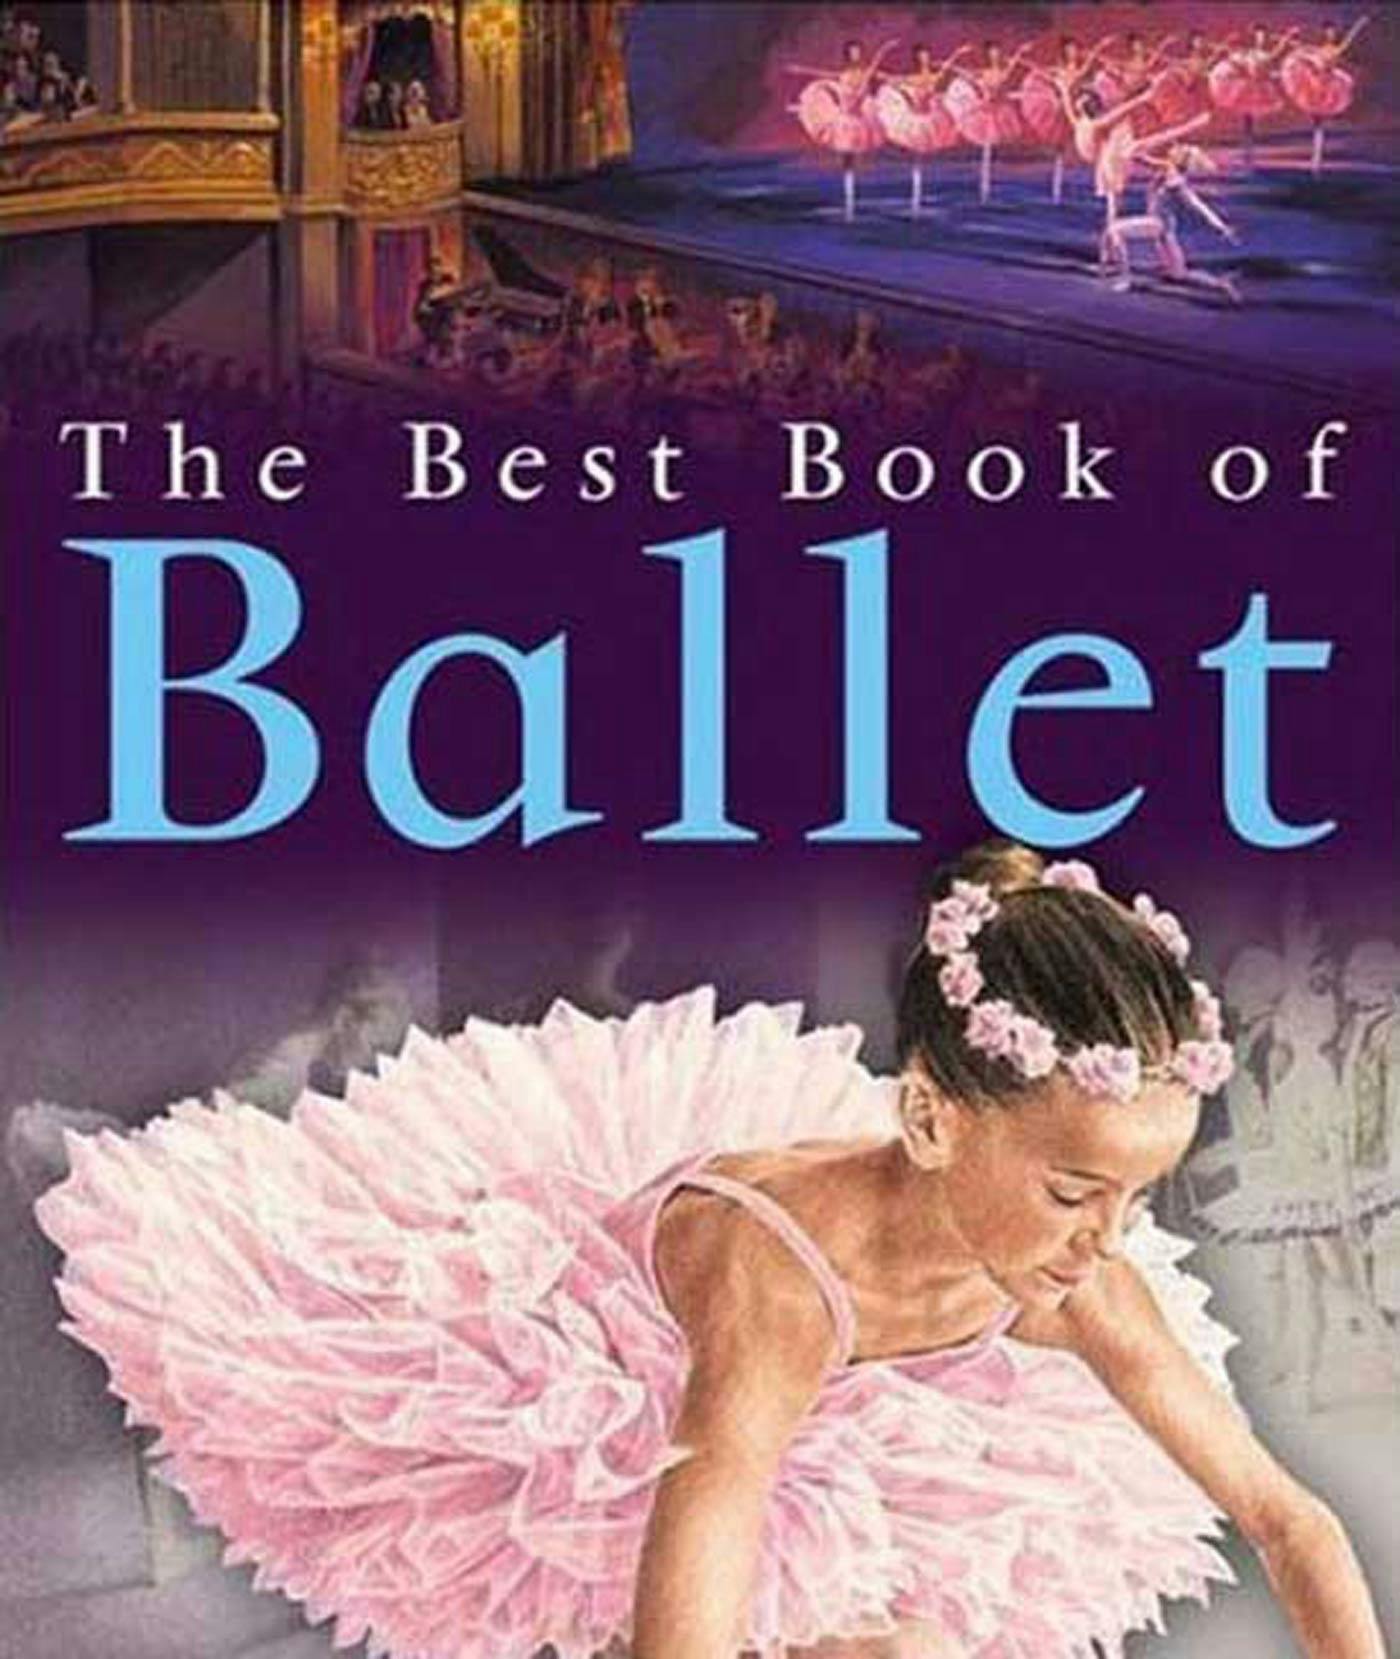 Image of The Best Book of Ballet